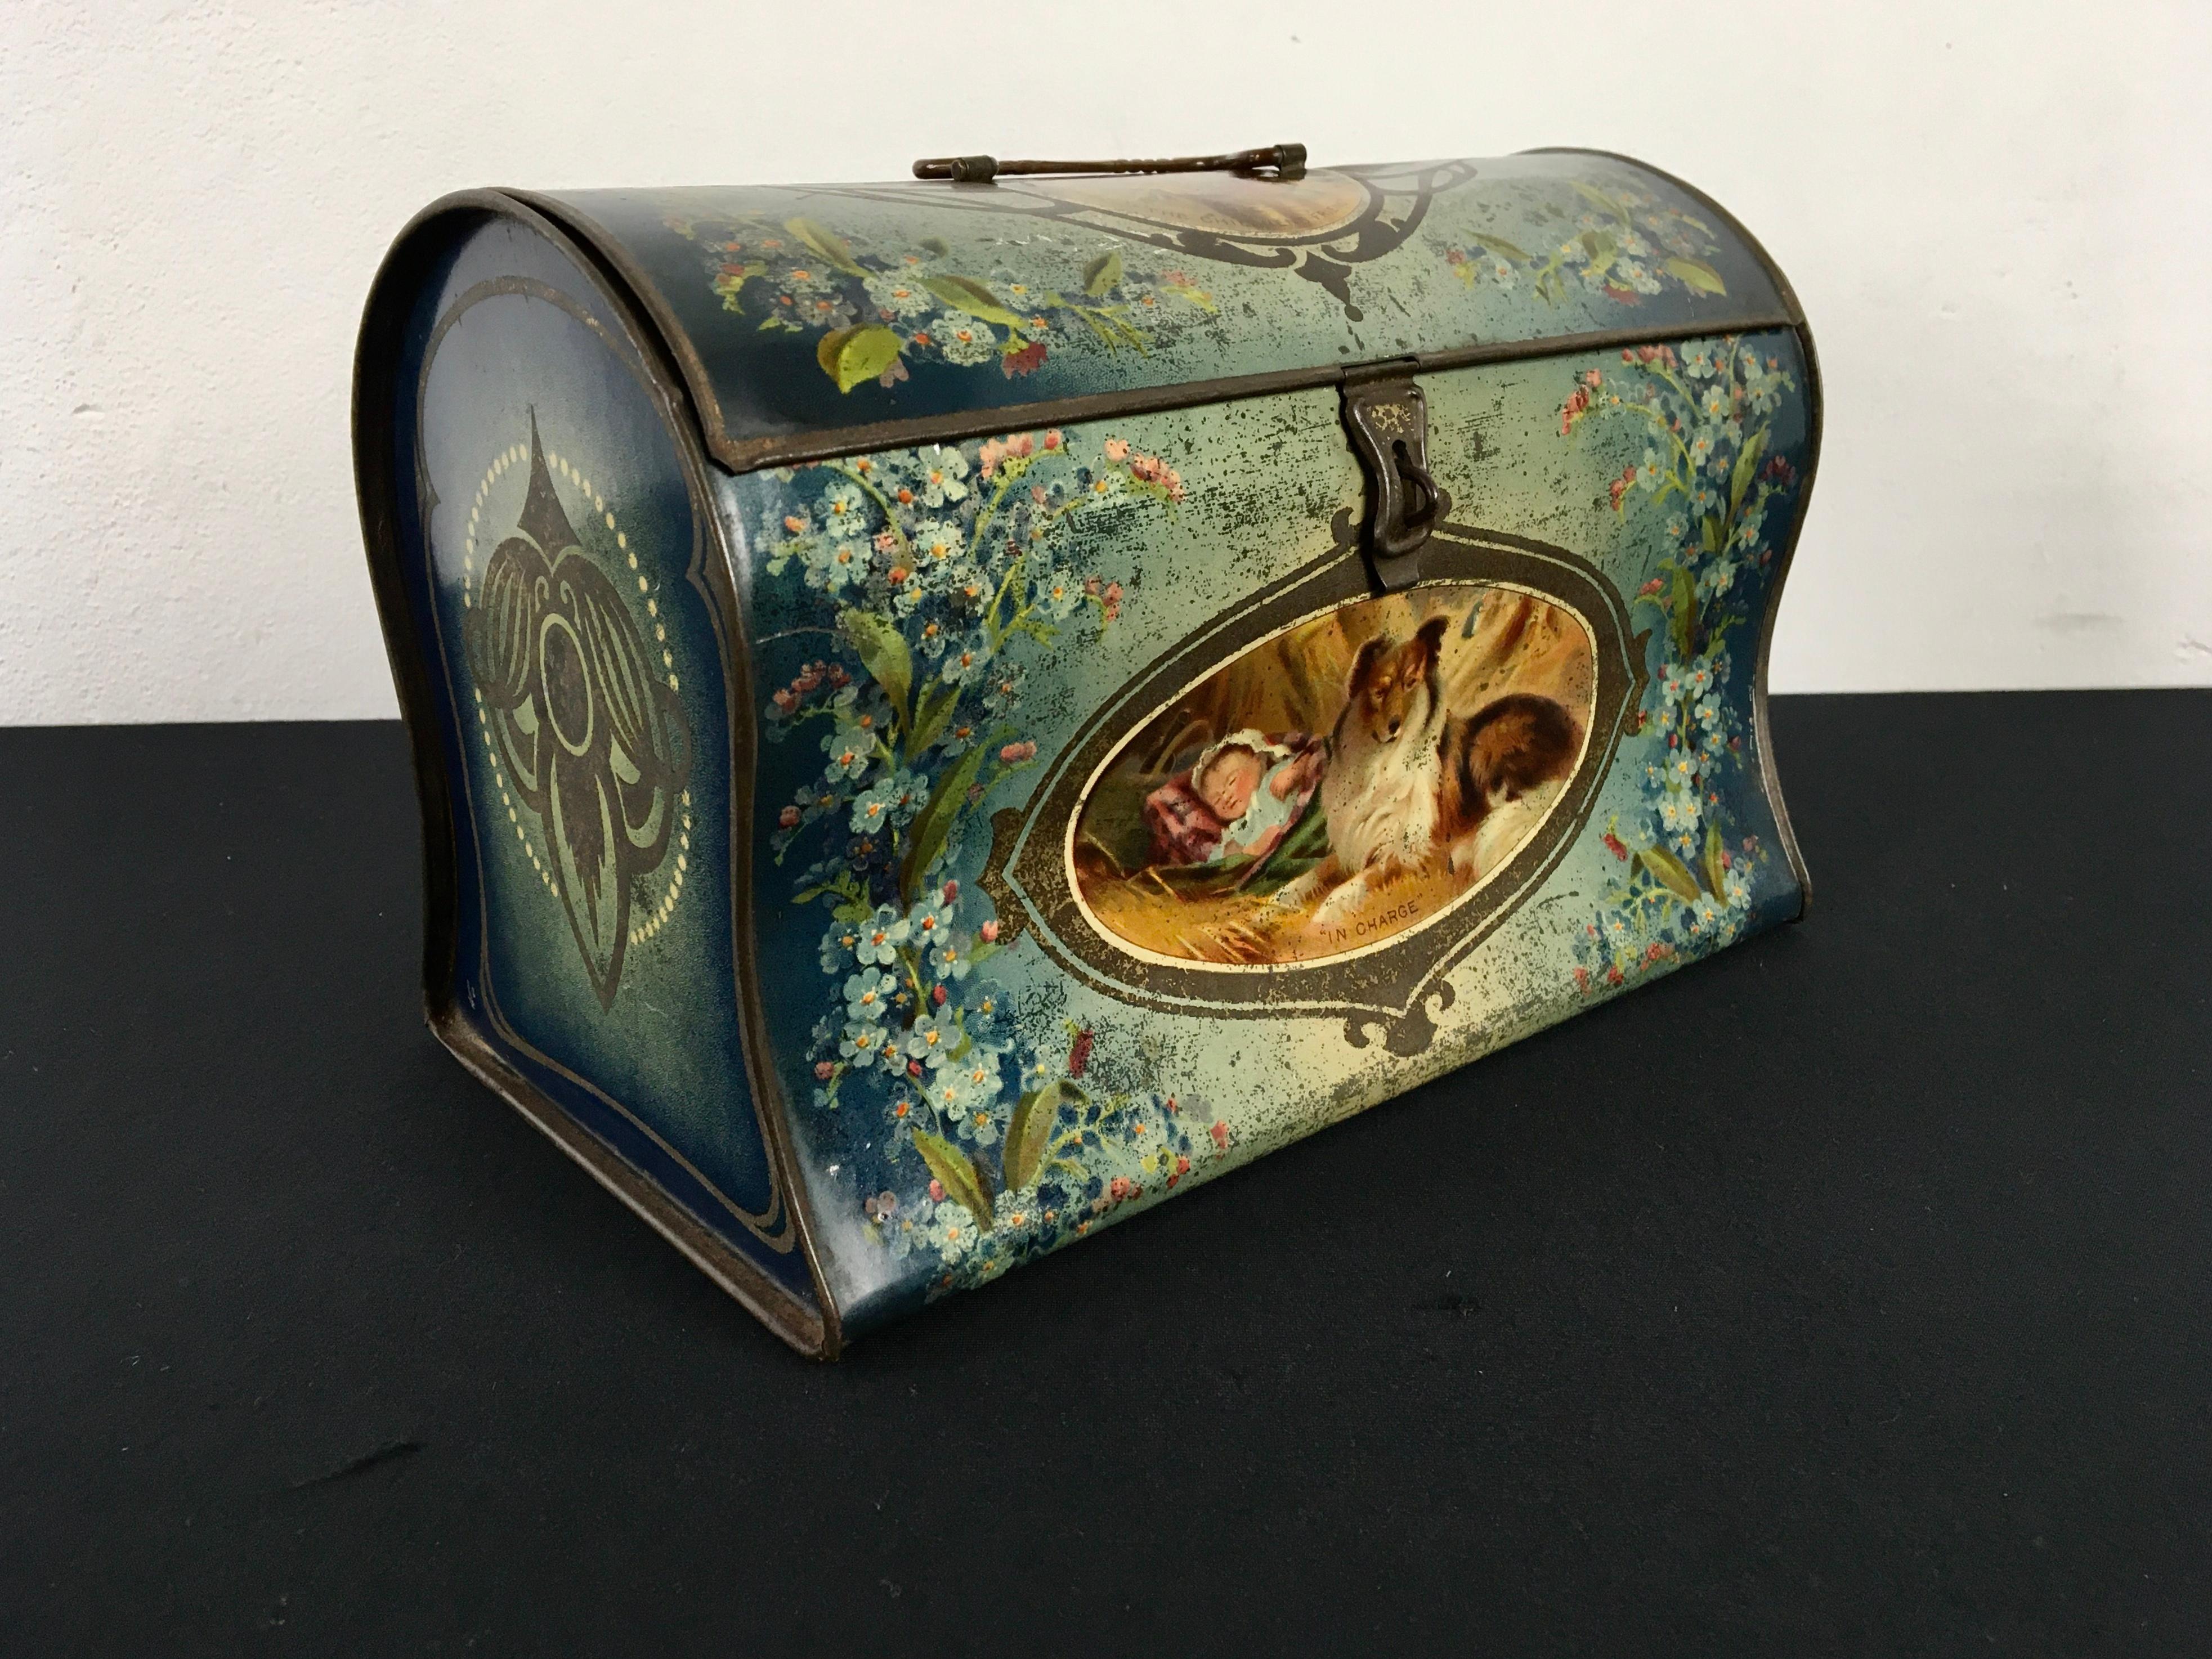 Jugendstill - Art Nouveau tin with handle and Dogs. 
You see a Collie dog known as Lassie 
and St Bernard Dog or Saint Bernard Dog.
It's a beautiful shaped tin with an unusual design: it looks like a suitcase, handbag or bag to hold. Blue